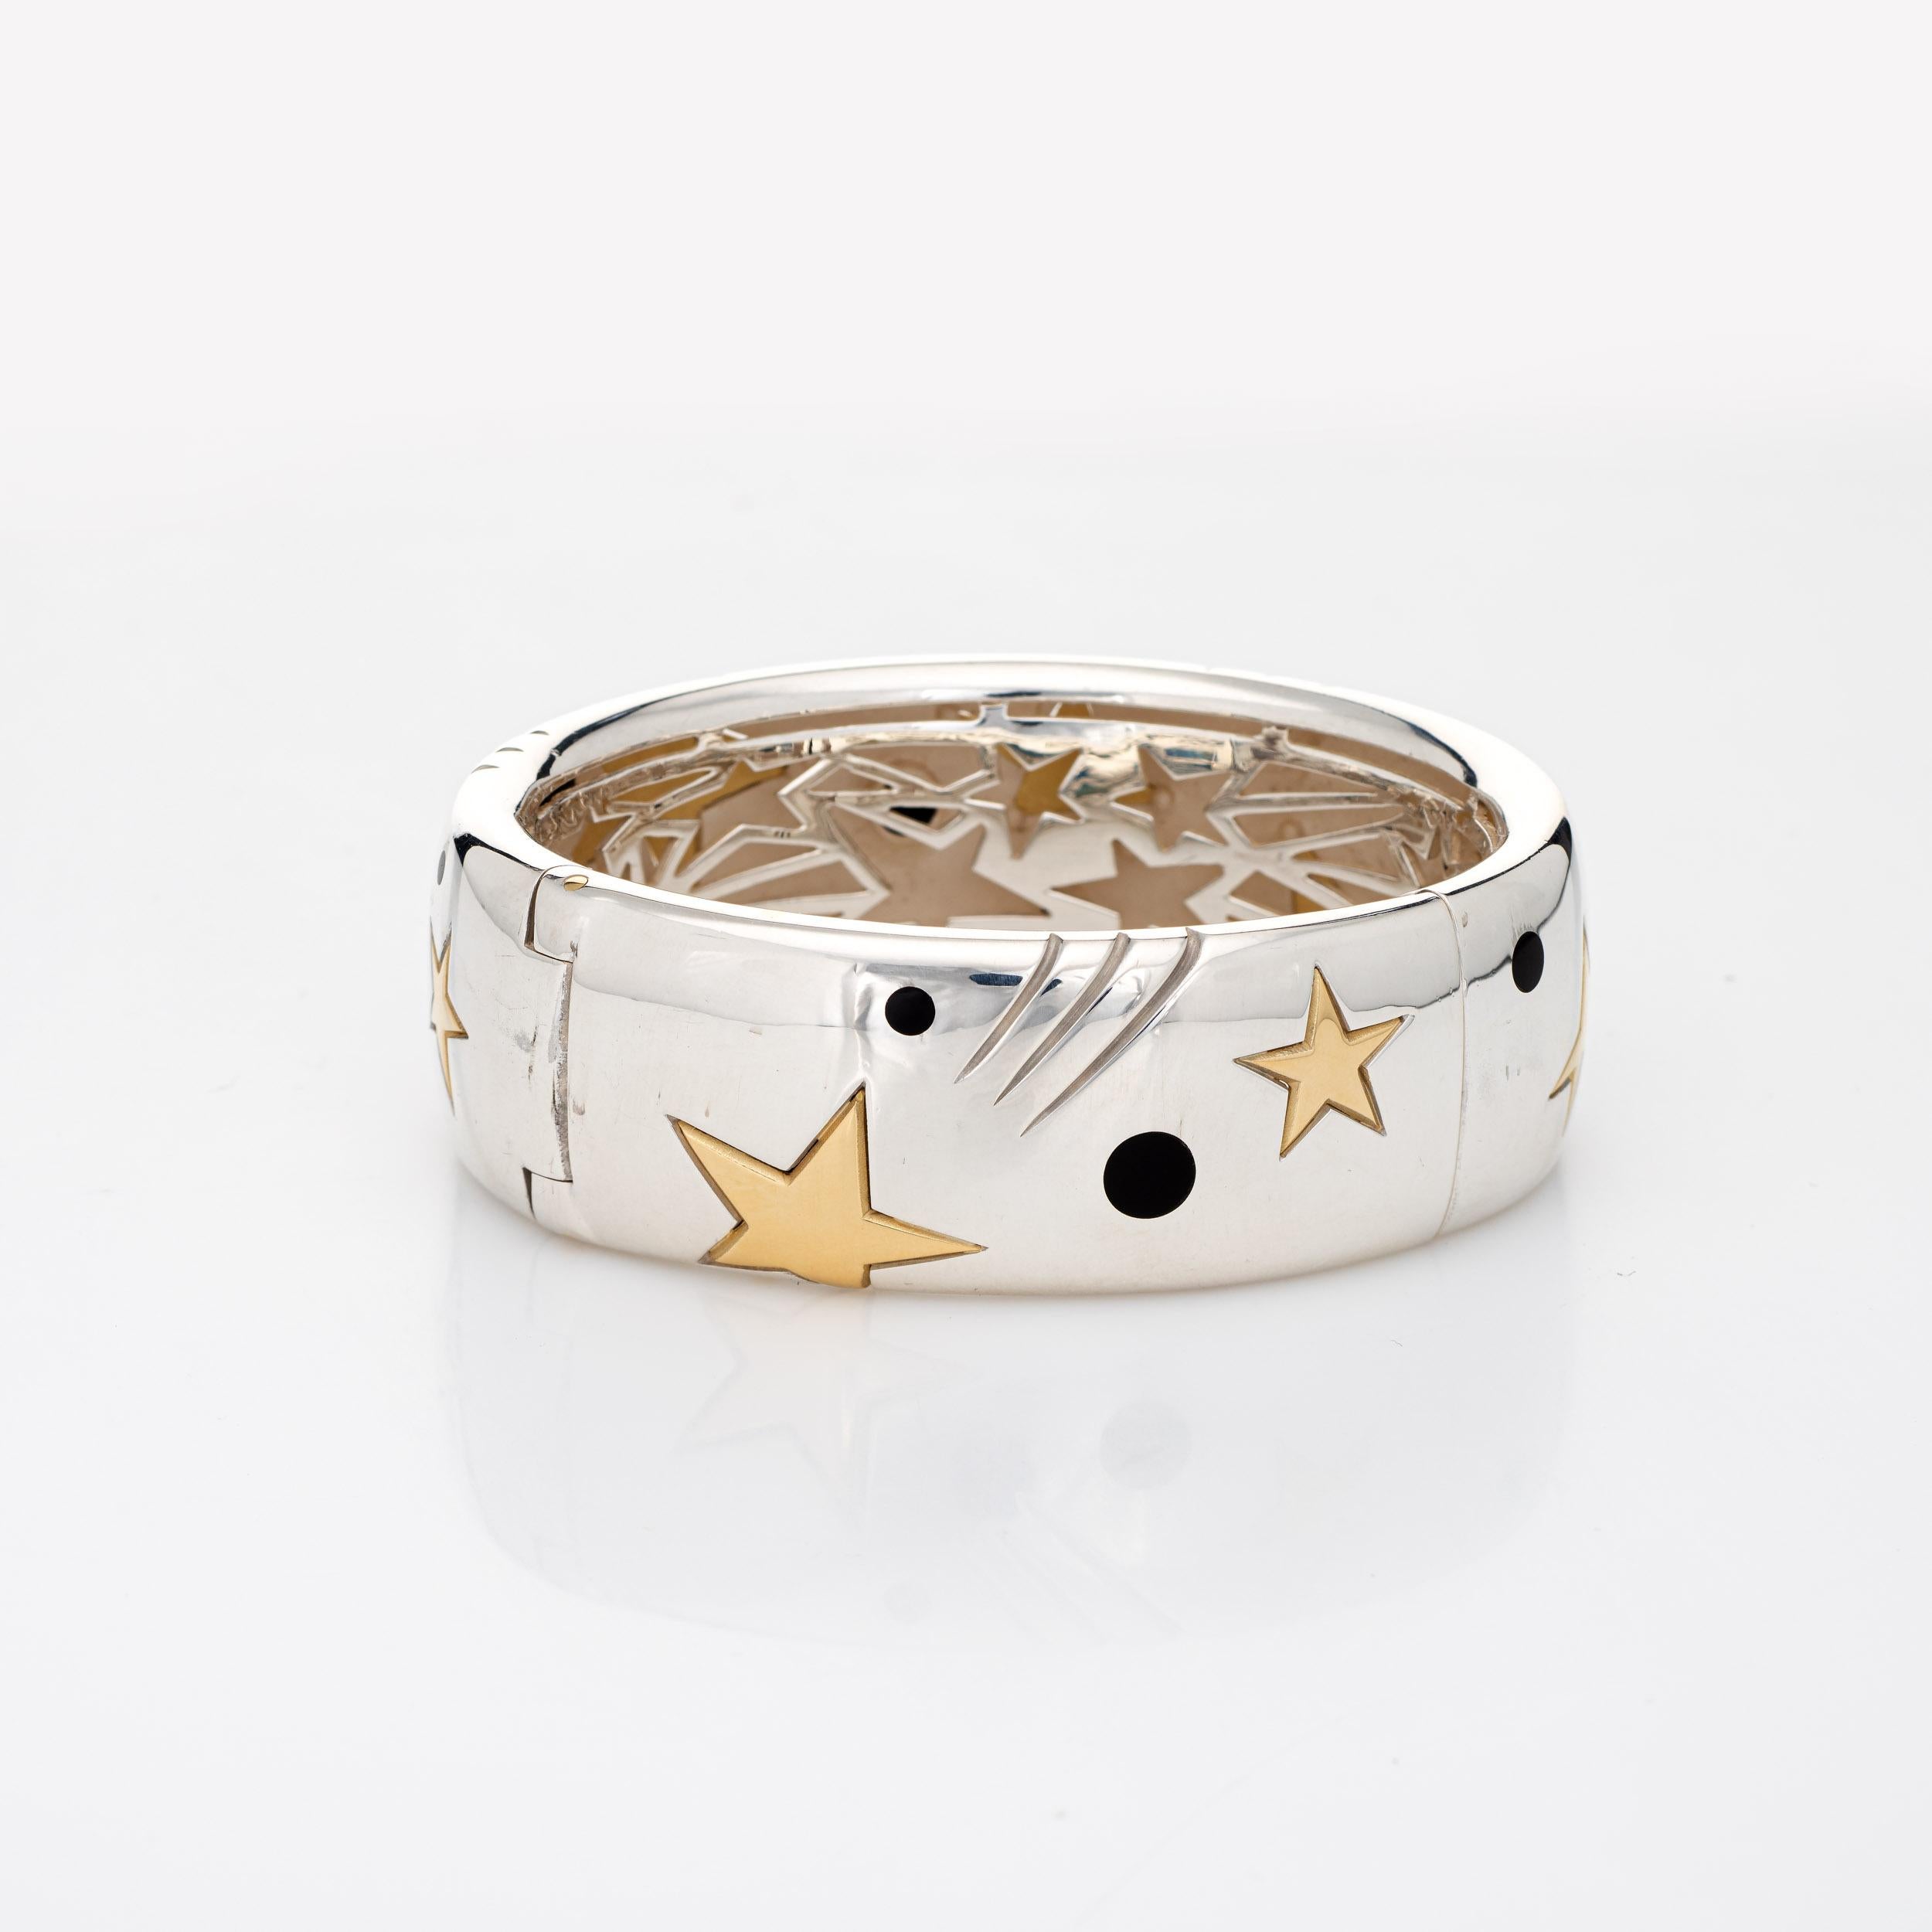 Stylish Michael Bondanza star bracelet crafted in sterling silver & 18 karat yellow gold (circa 2000s). 

The bangle bracelet features a star pattern rendered in 18k yellow gold and makes a great statement on the wrist. Michael Bondanza is a gifted